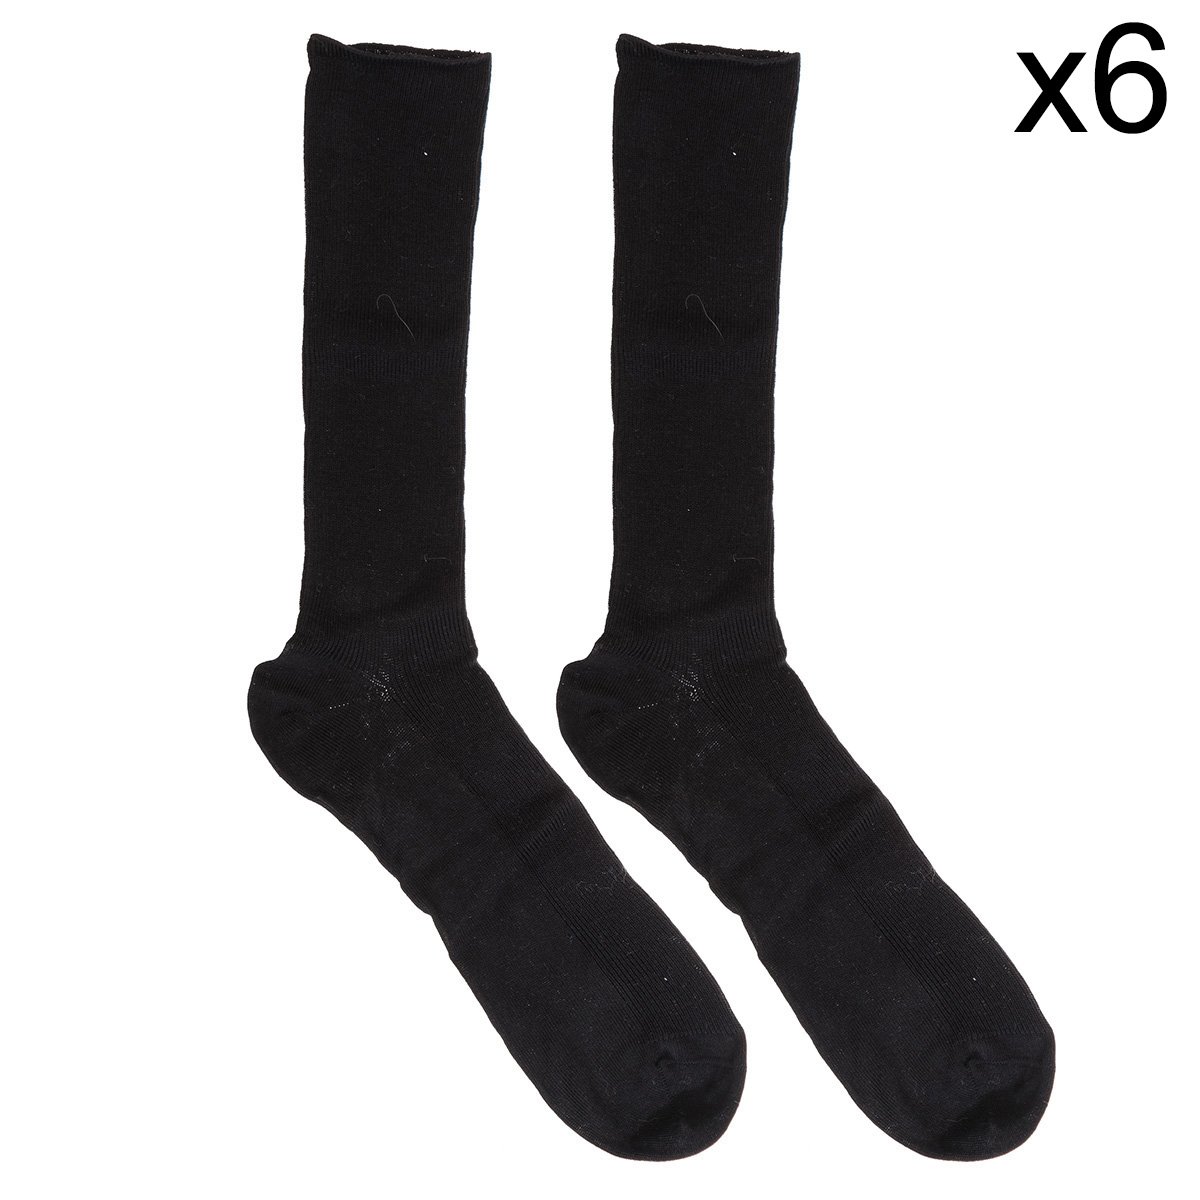 Black Price - Pack-6 Calcetines sin goma Essential 6077 hombre